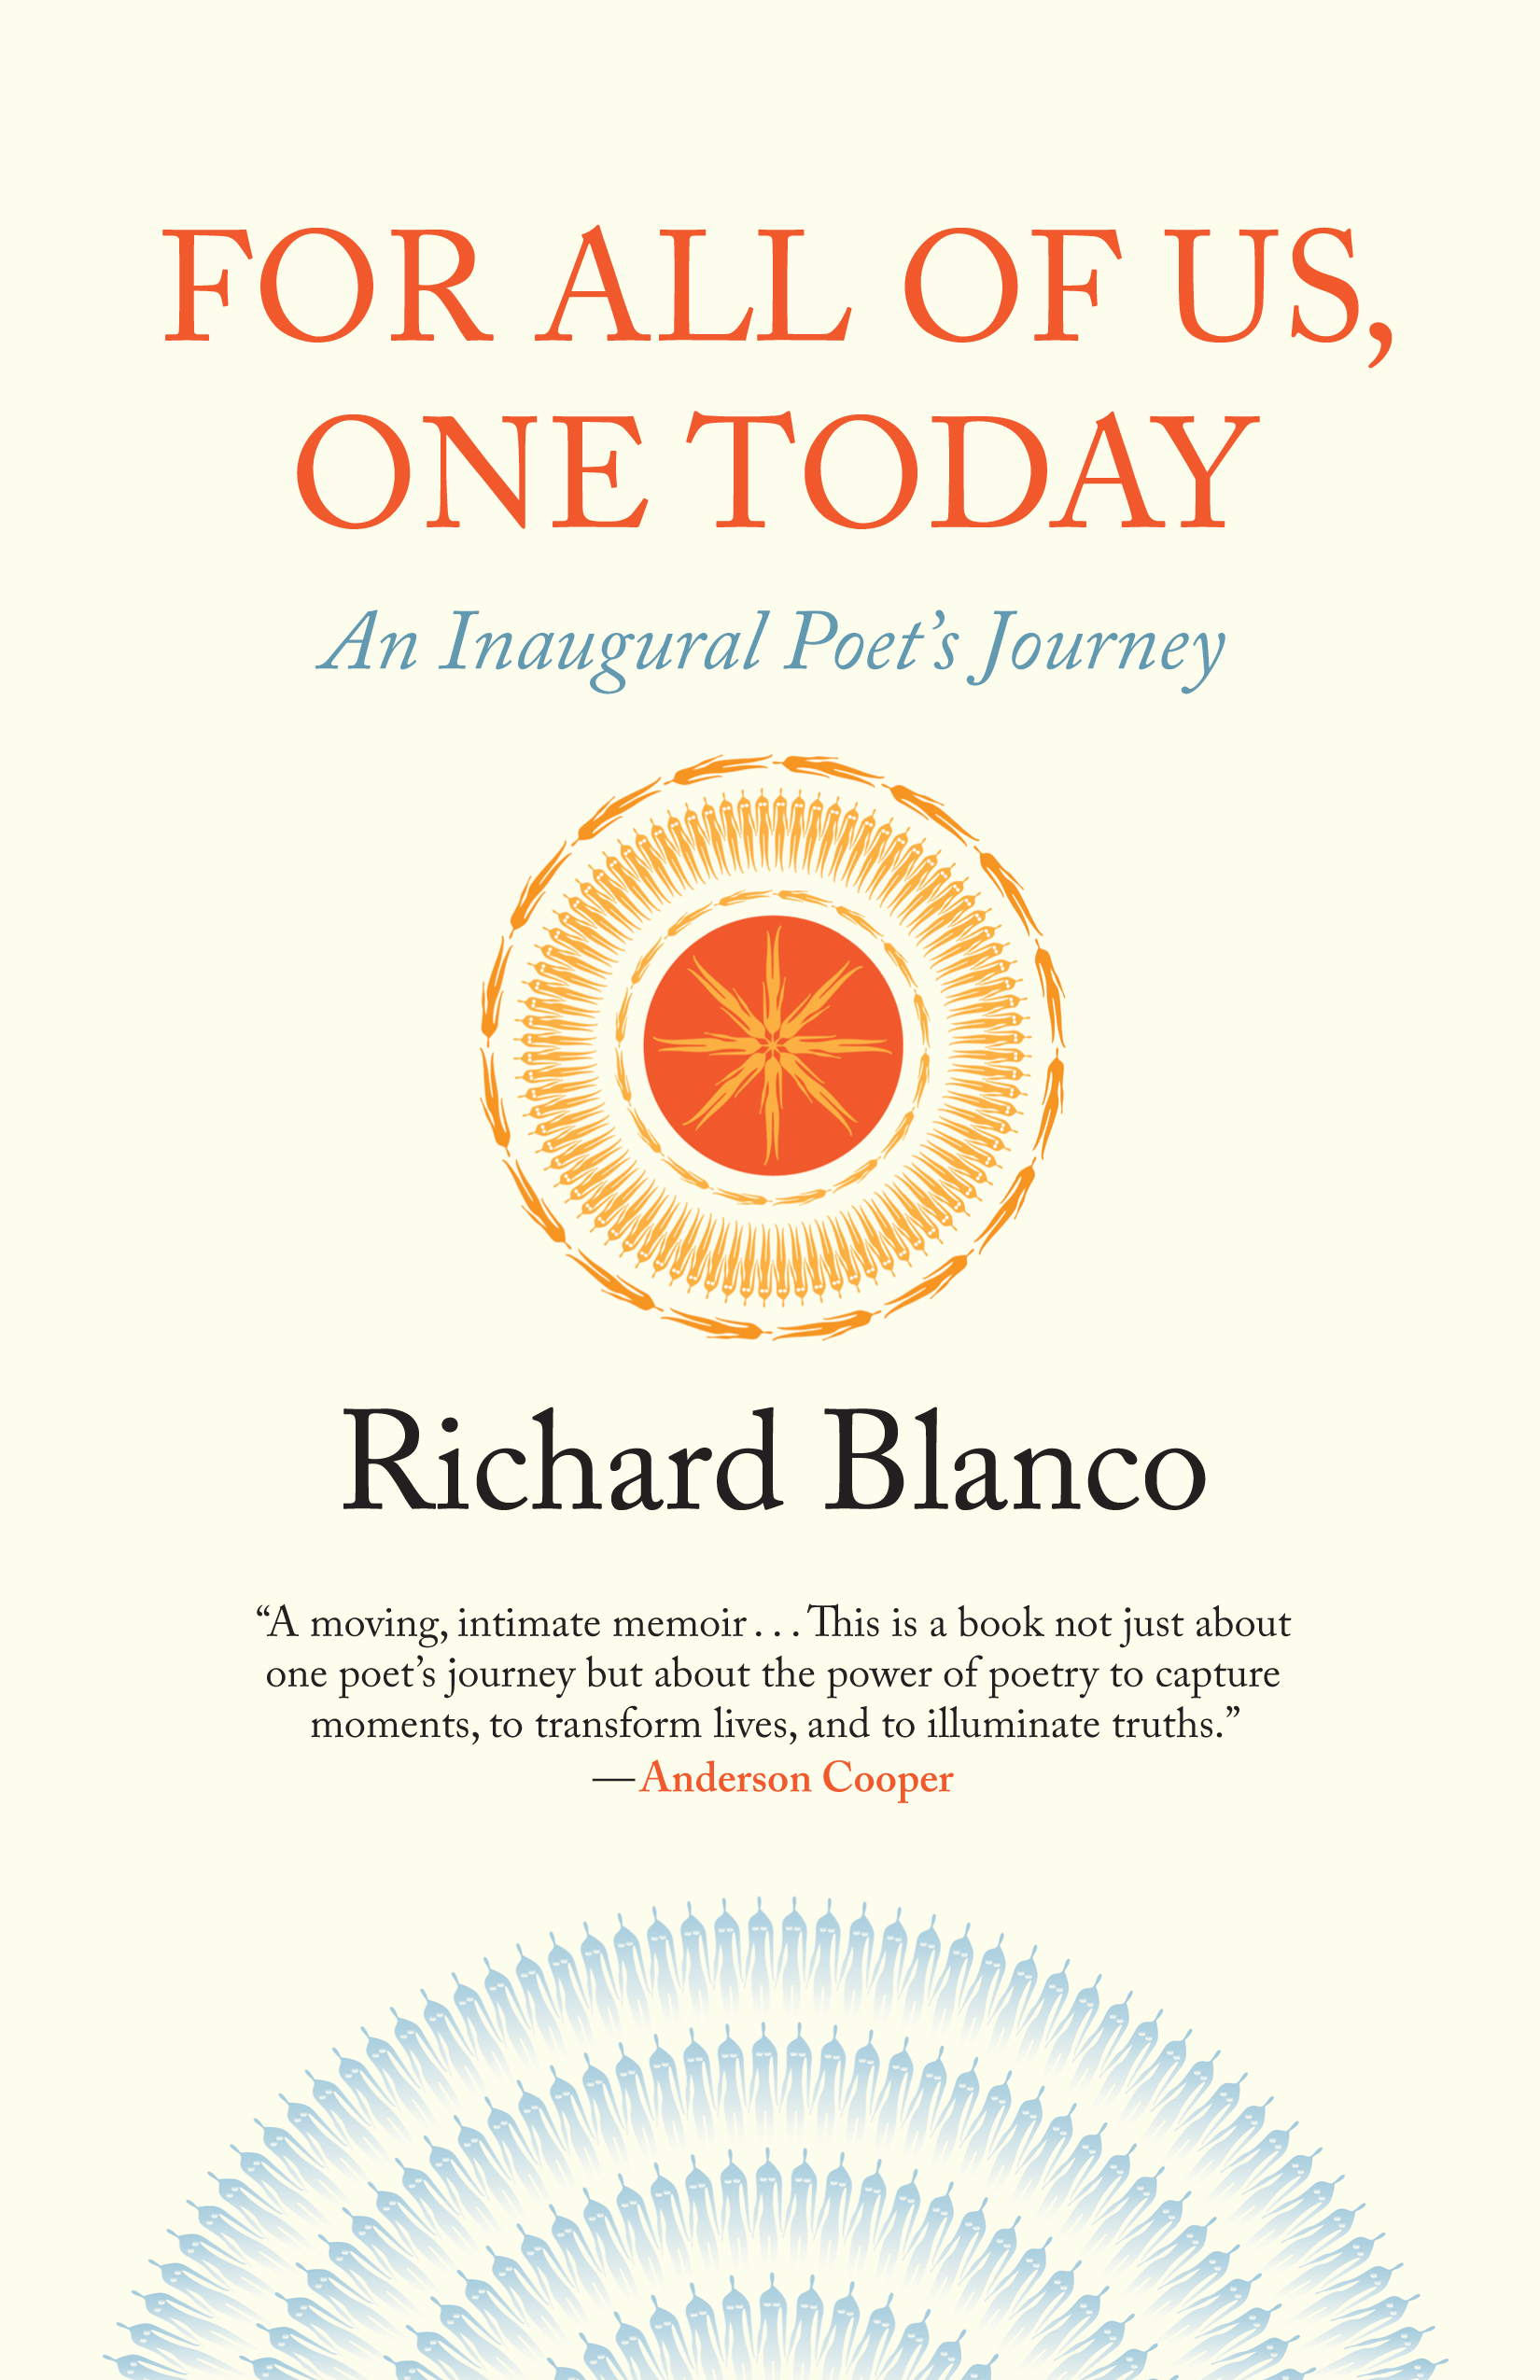 For all of us, One Today by Richard Blanco